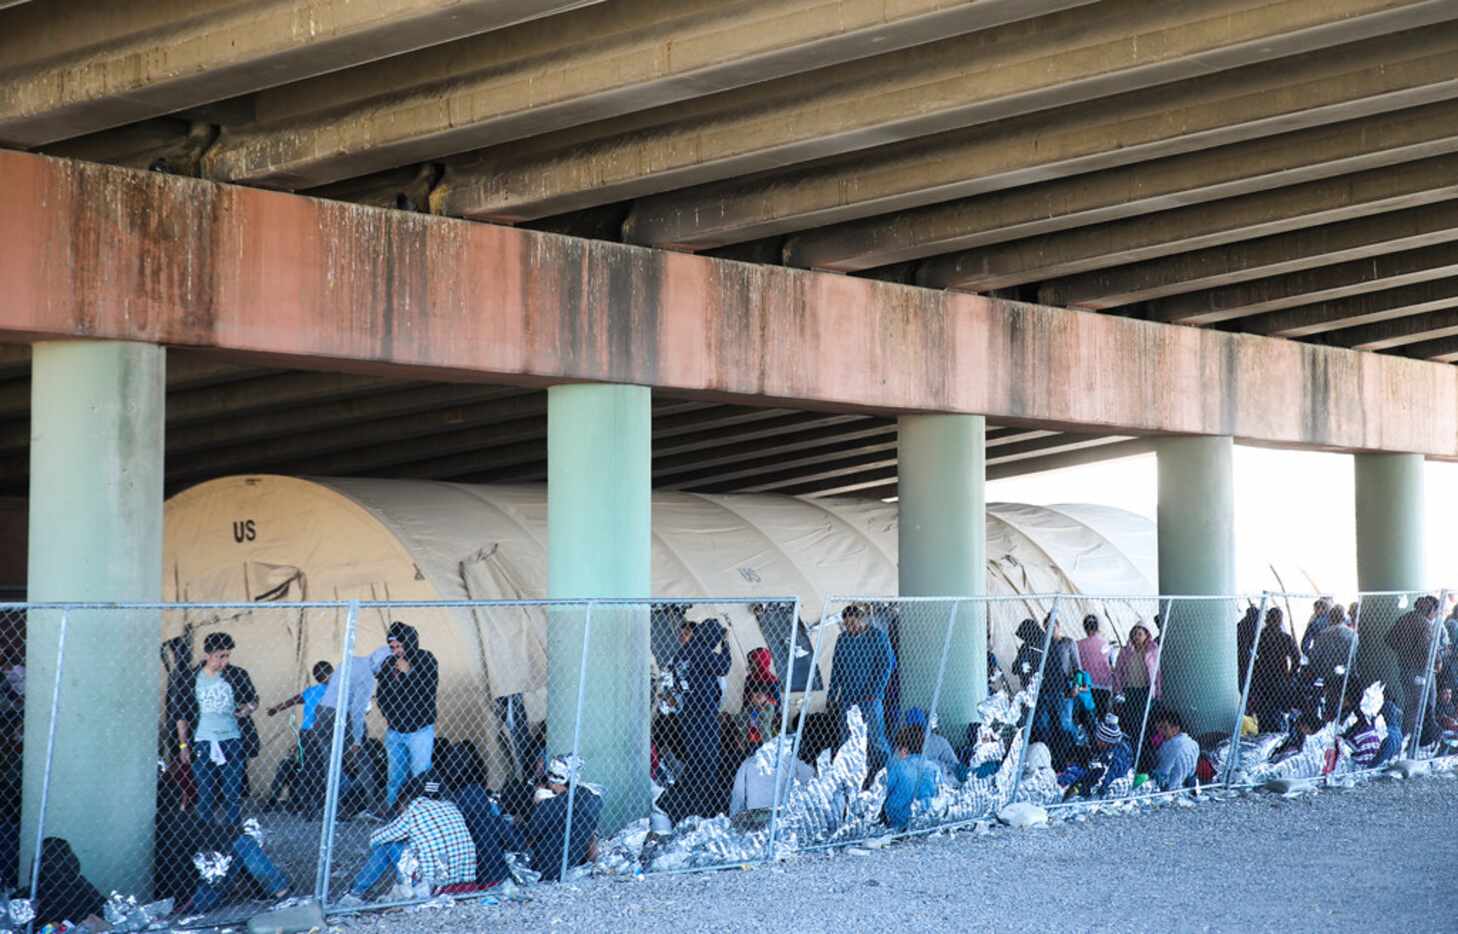 Migrants seeking asylum are held in a temporary transition shelter under the Paso Del Norte...